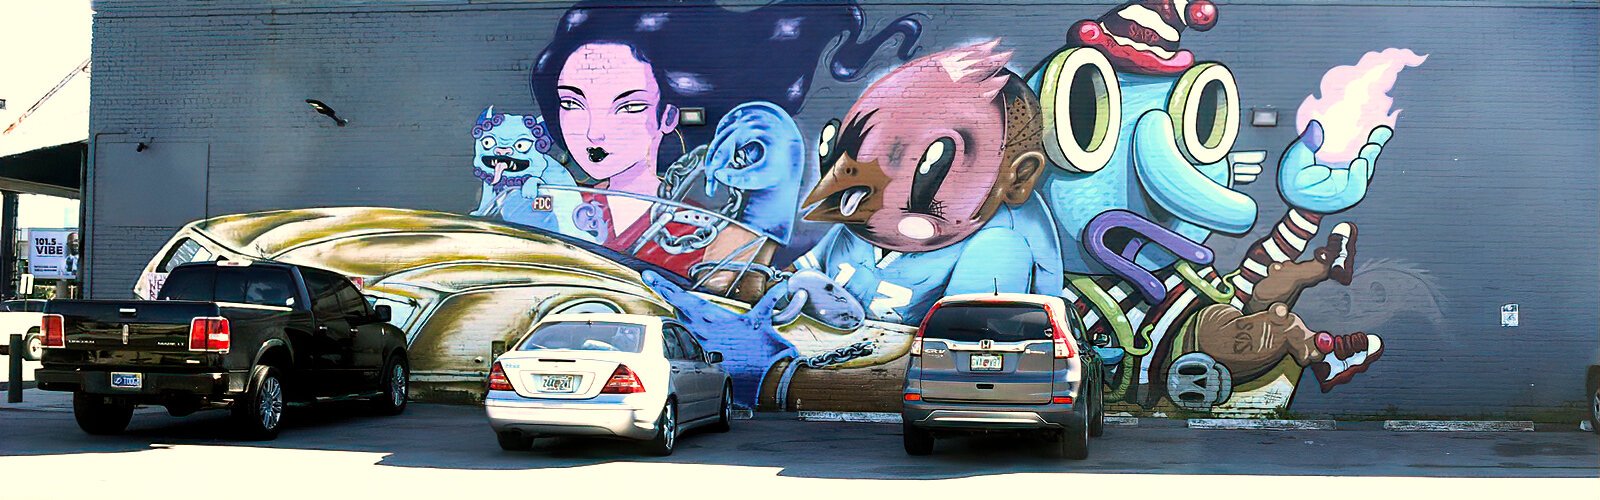 This mural of characters in a Cadillac was created by artists Lillipore, Sentrock, Jujmo and Birdcap in 2019.